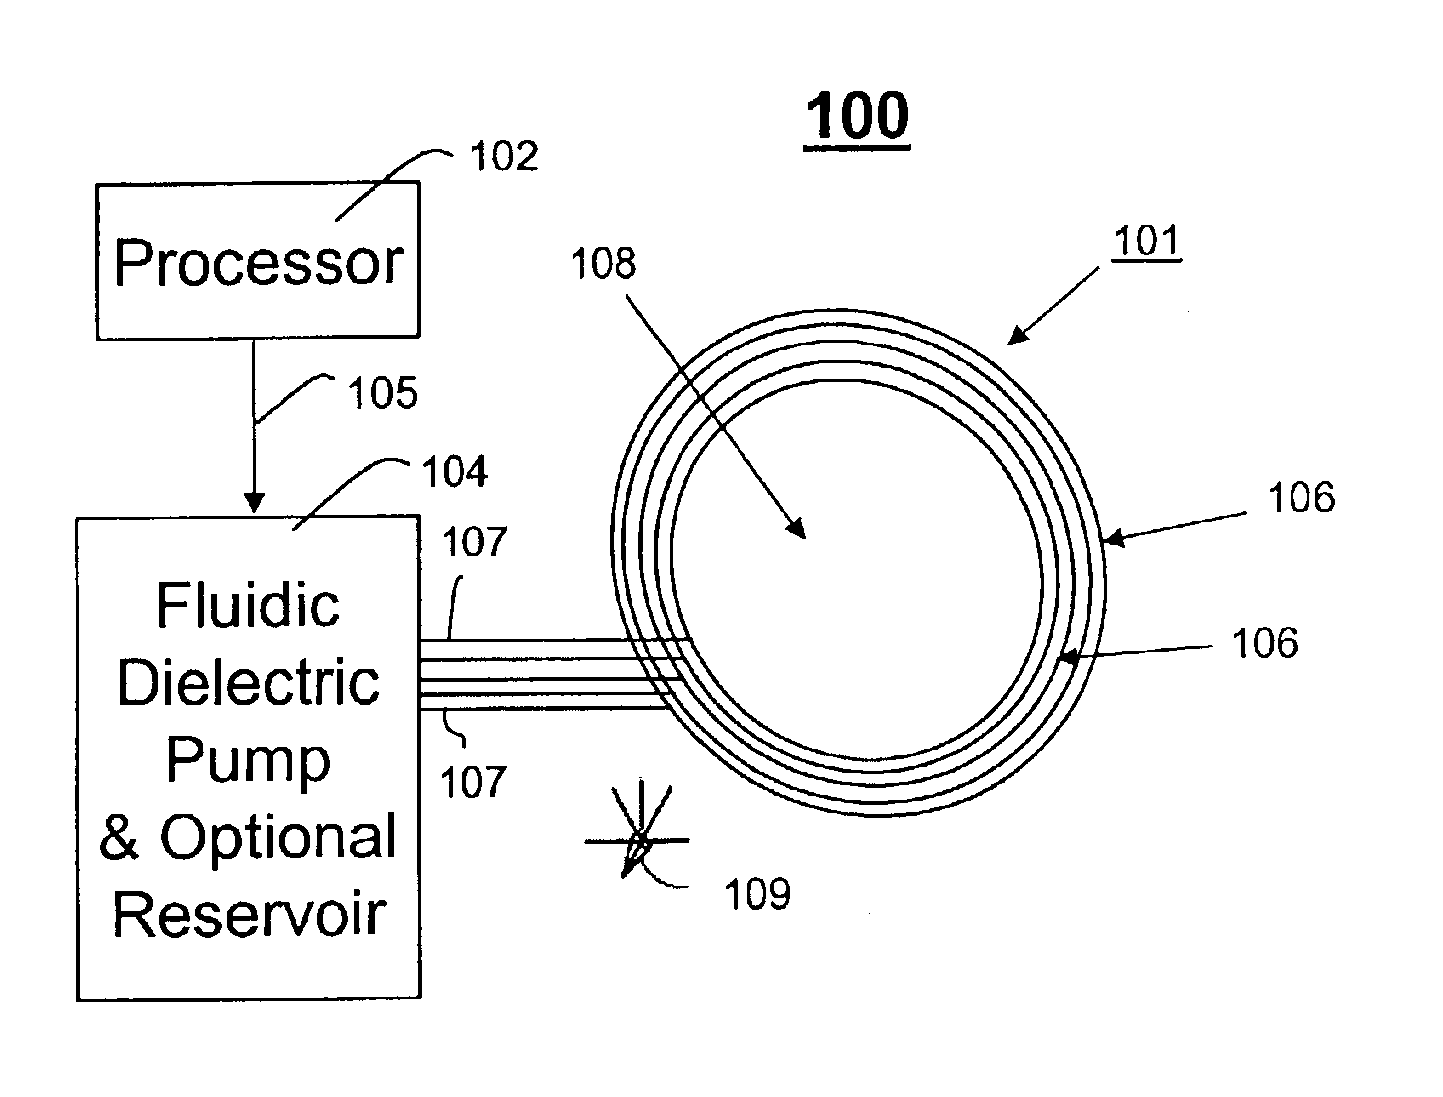 Taper adjustment on reflector and sub-reflector using fluidic dielectrics